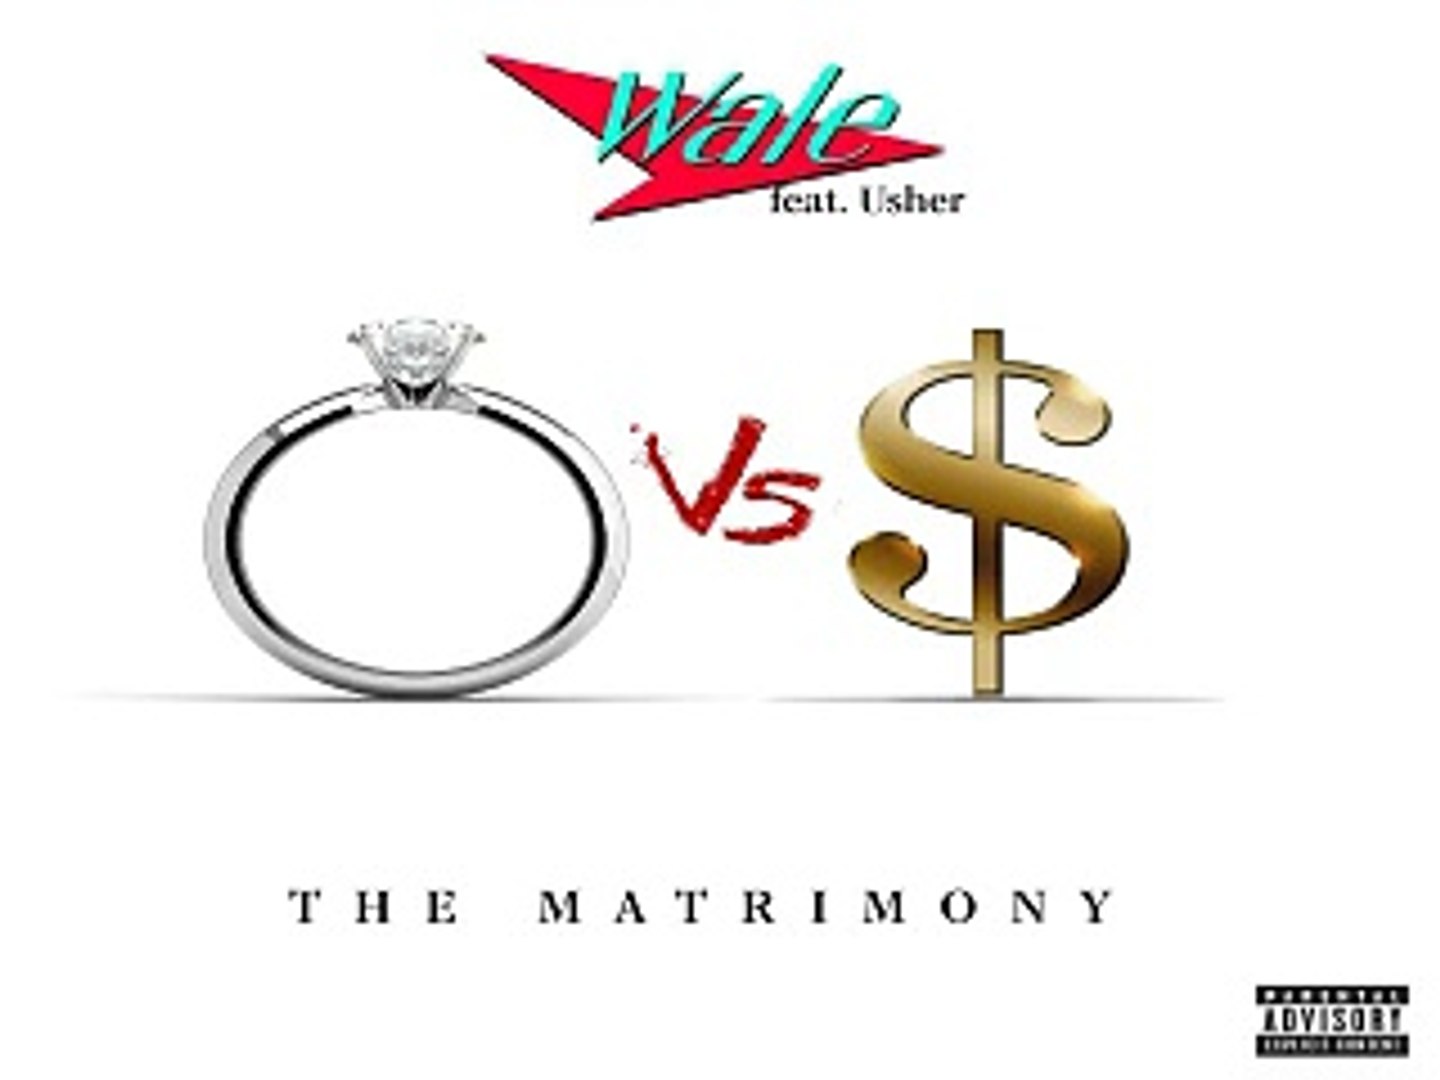 DOWNLOAD MP3 ] Wale - The Matrimony (feat. Usher) [Explicit] [ iTunesRip ]  - video Dailymotion